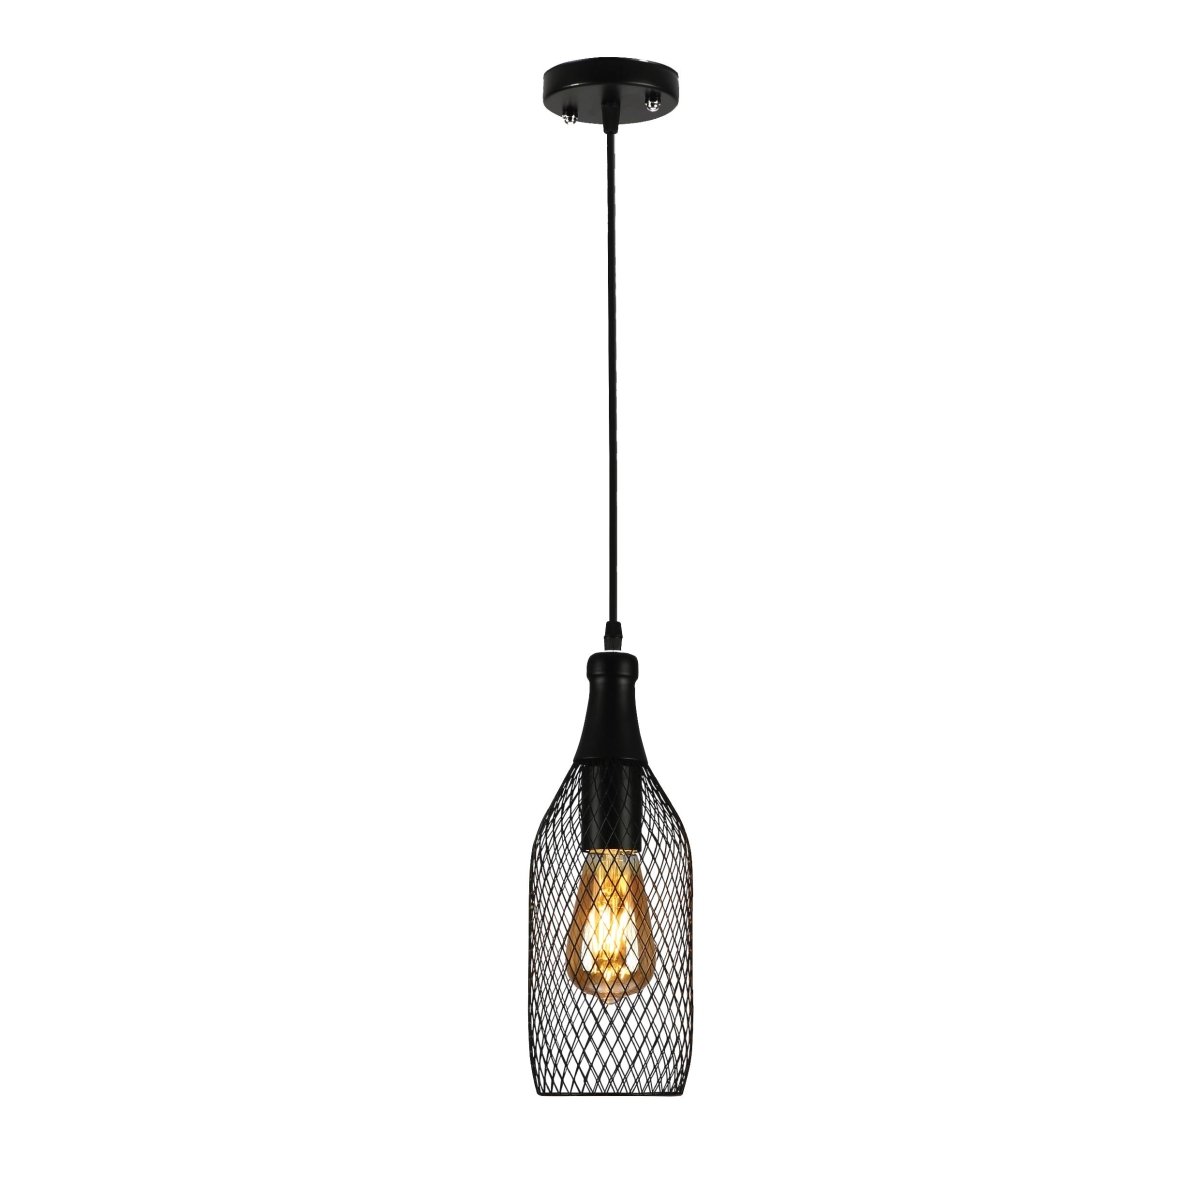 Main image of Wire Mesh Industrial Dome Pendant Ceiling Light with E27 | TEKLED 159-17752